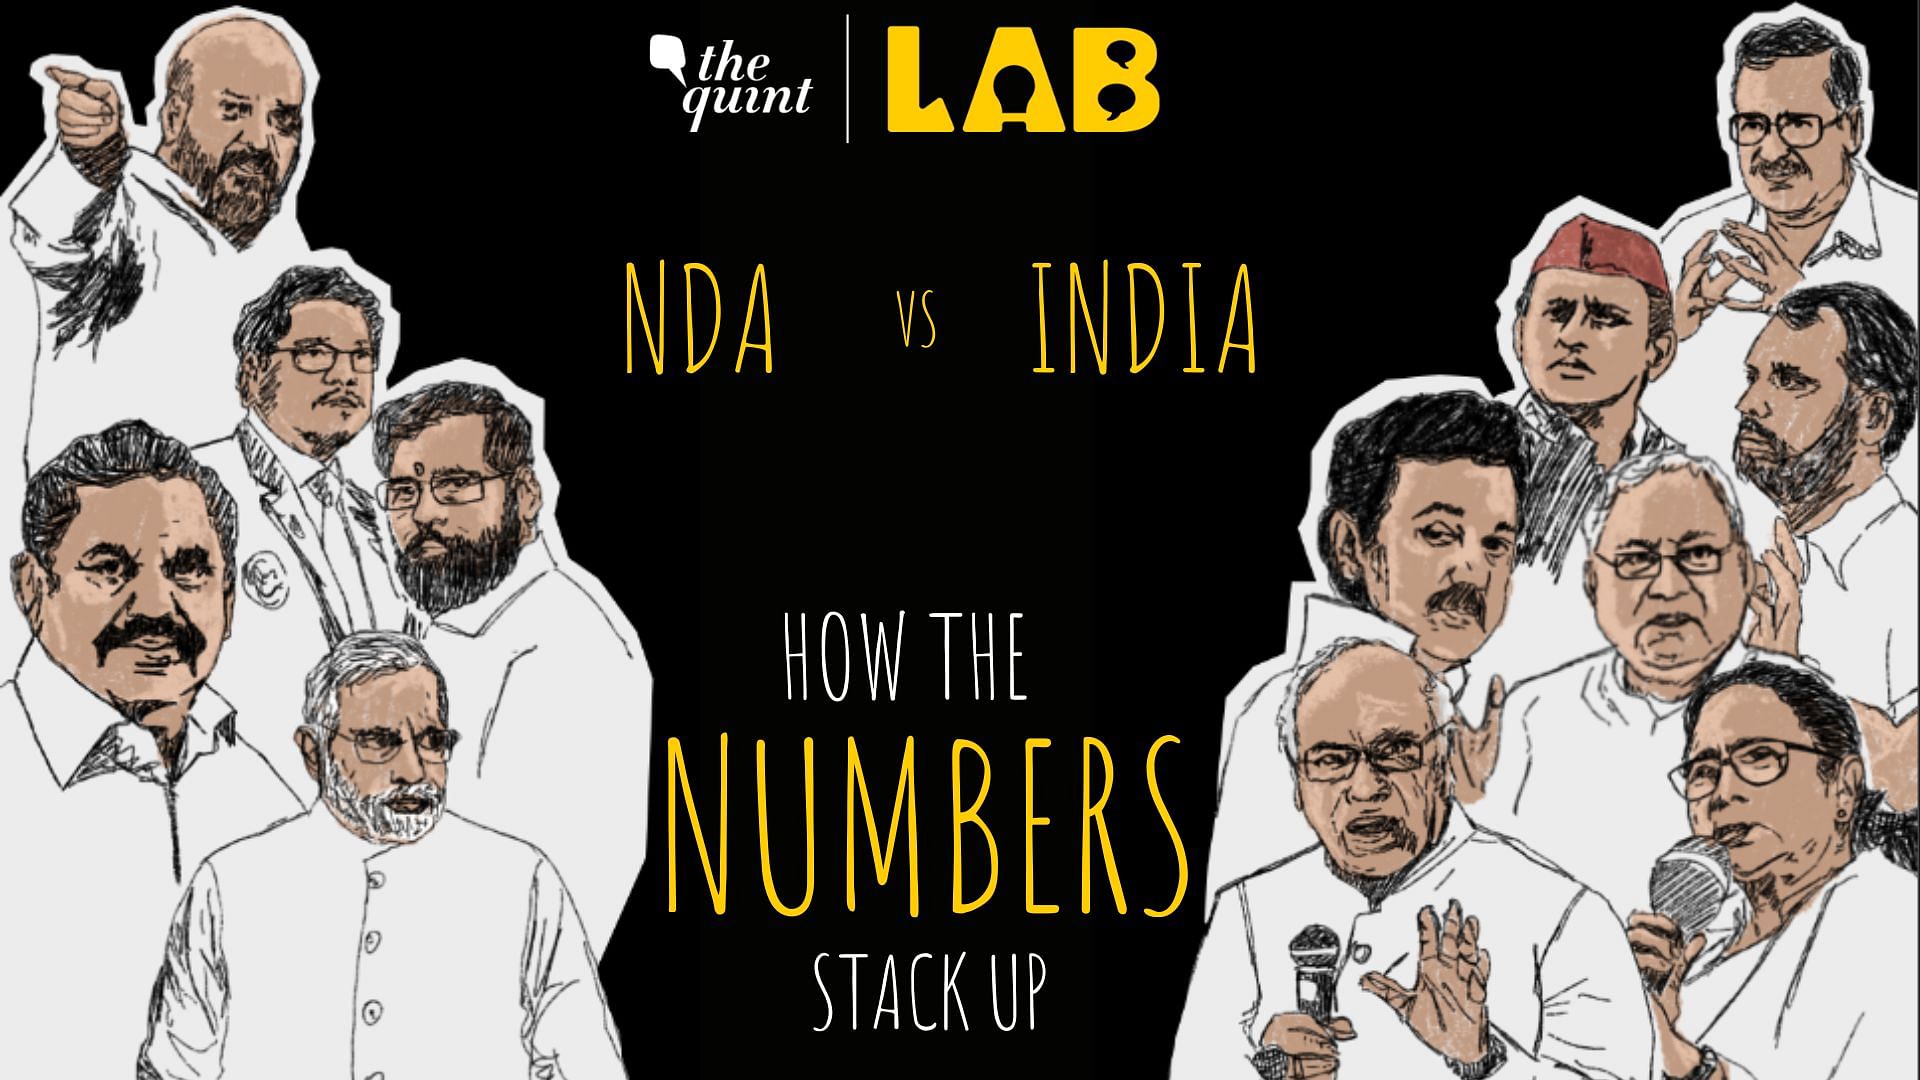 <div class="paragraphs"><p>How do the numbers of NDA and INDIA stack up against each other?</p></div>